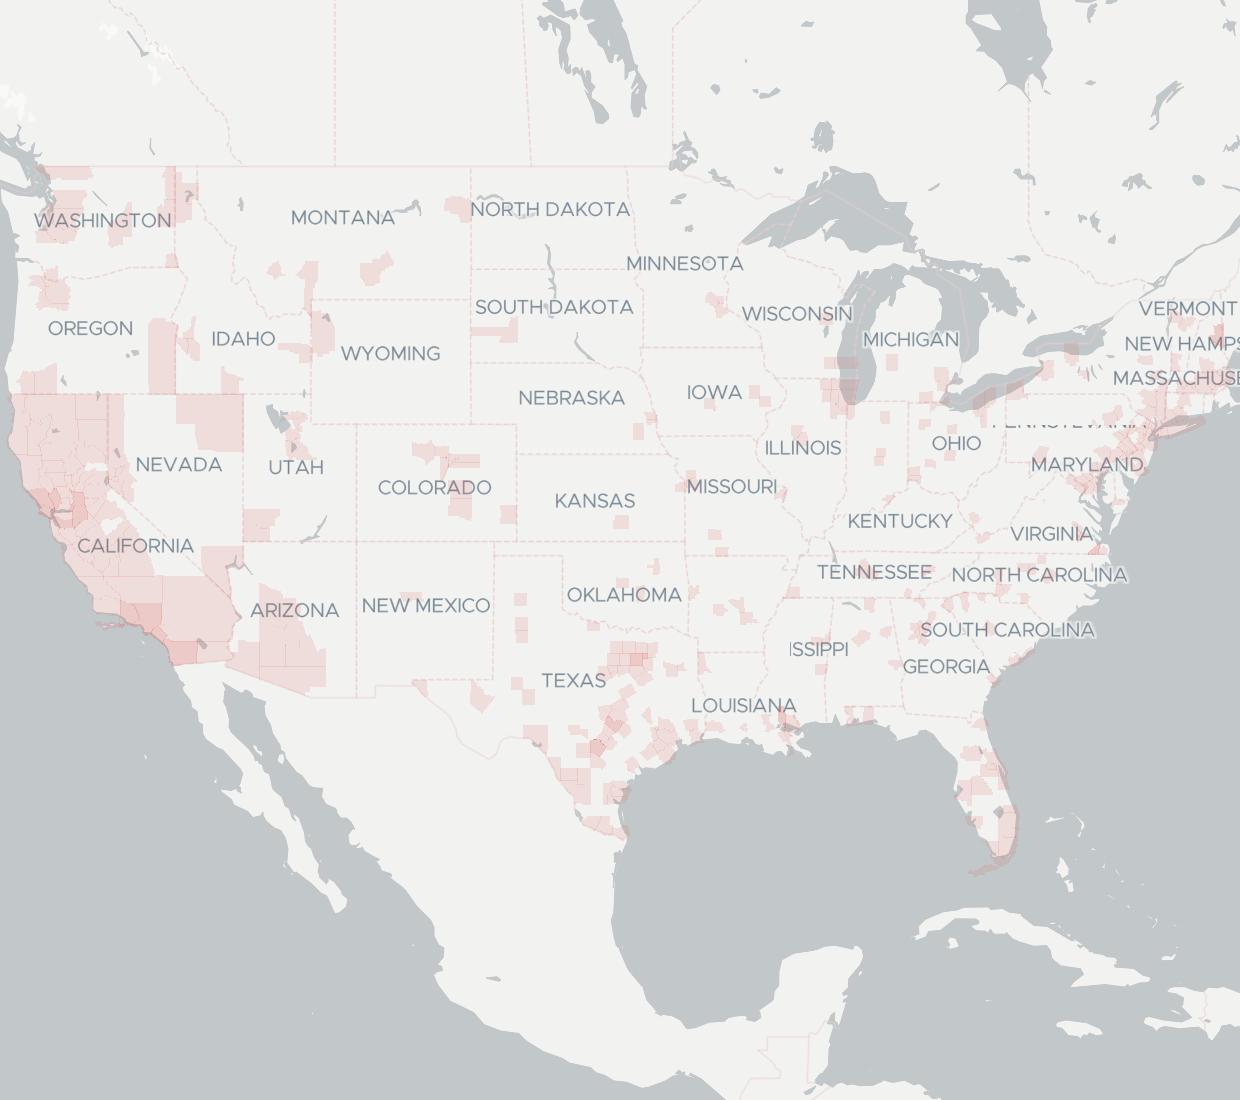 TPx Communications Availability Map. Click for interactive map